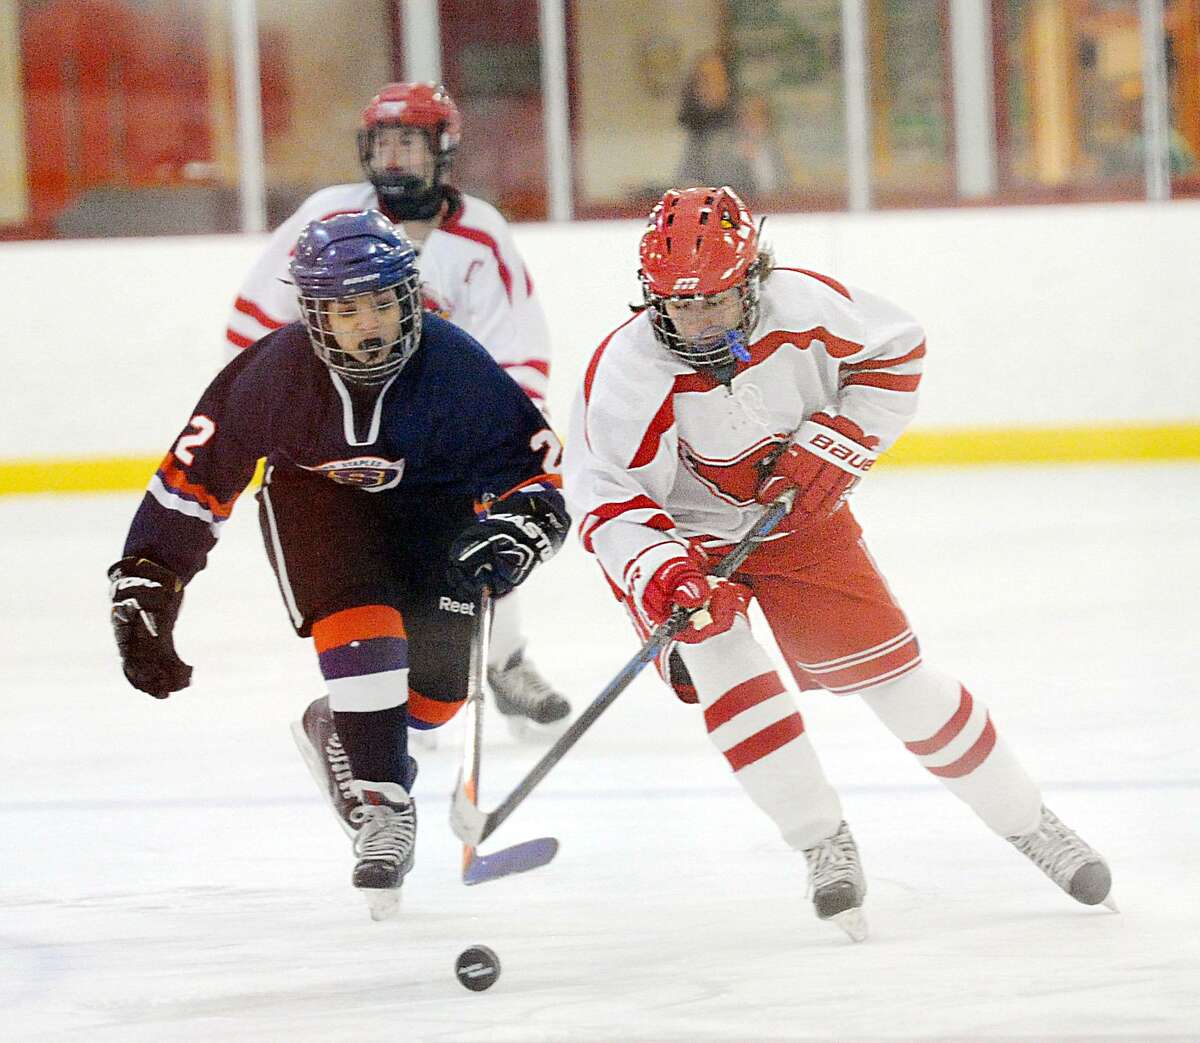 Greenwich’s Paige Finneran, right, against Kaela Shaulson of Stamford-Staples-Westhill on Tuesday at Hamill Rink in Greenwich.